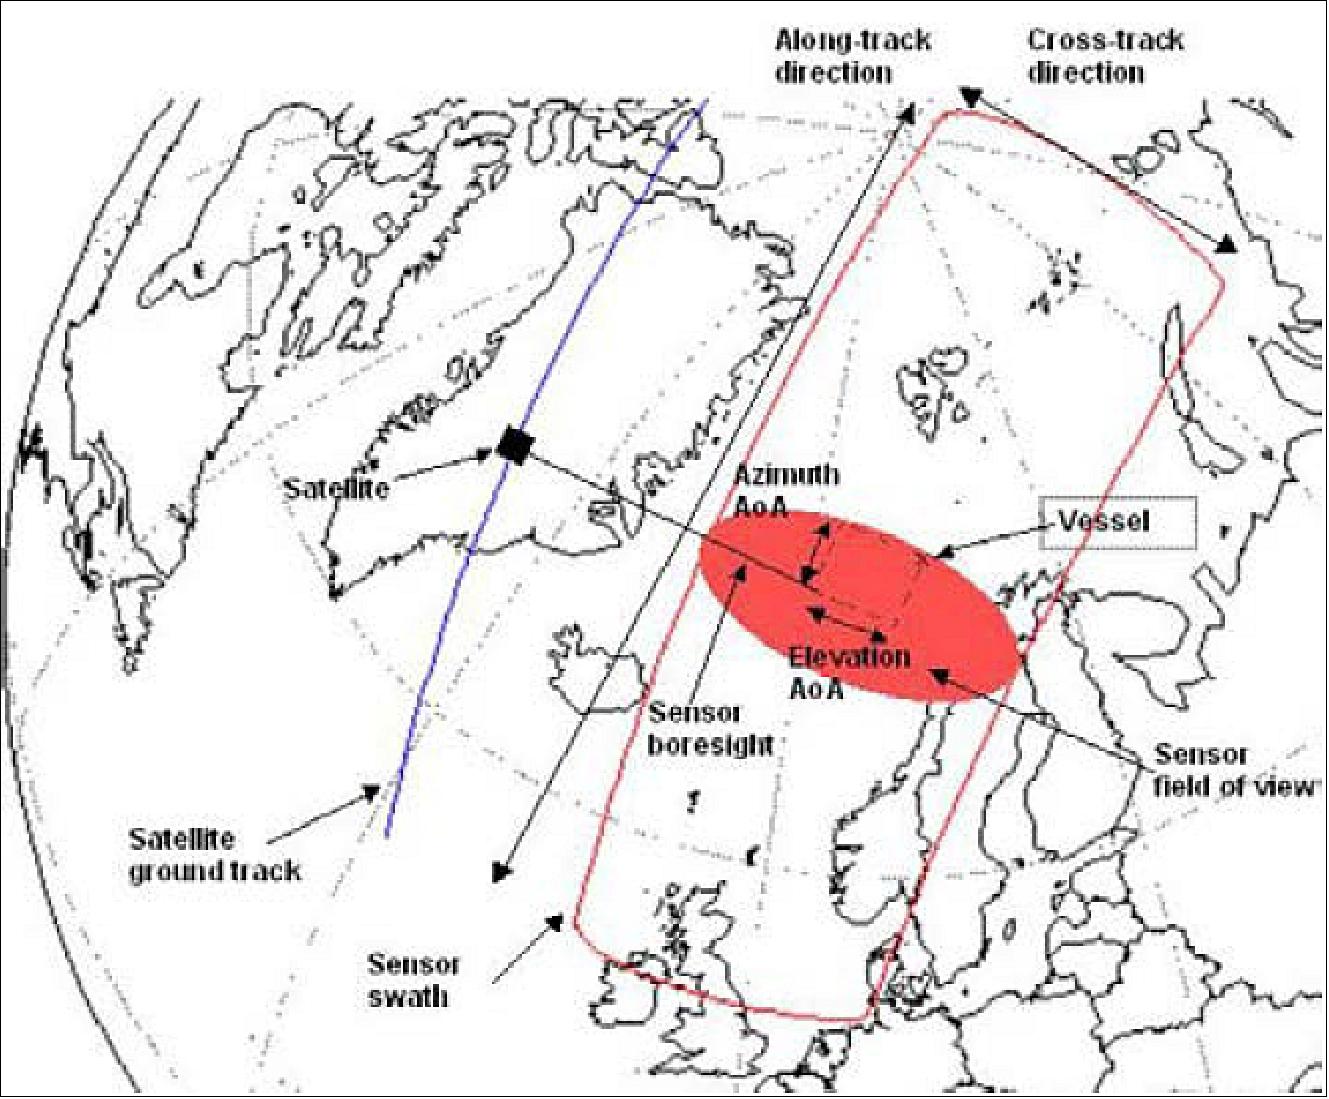 Figure 1: Example satellite pass over Greenland showing instantaneous coverage (filled red ellipse) and swath for 8 minutes of operation (area inside red line). Key terminology used in the text is also illustrated (image credit: NorSat-3 Team)